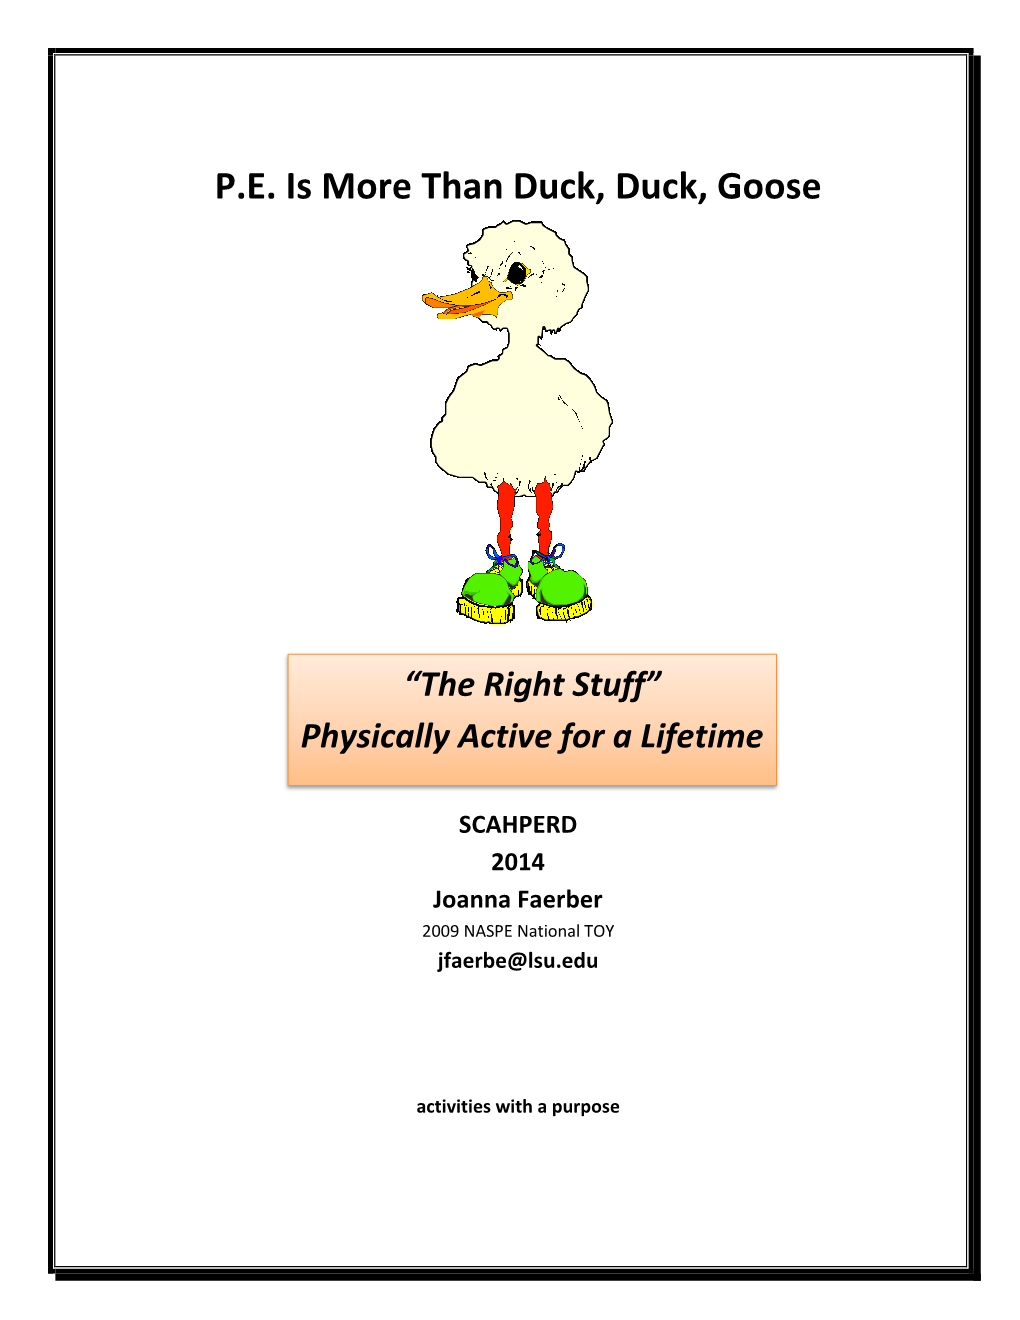 P.E. Is More Than Duck, Duck, Goose